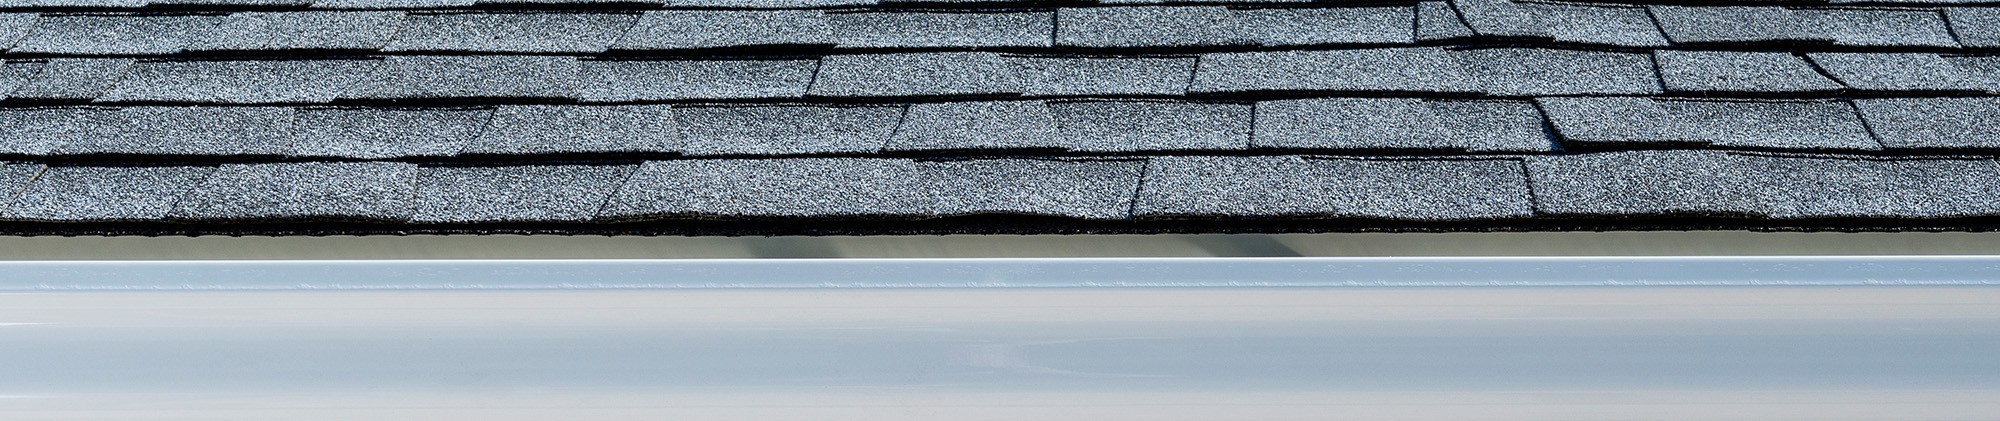 Muskego Gutter Cleaning, Repair & Installation